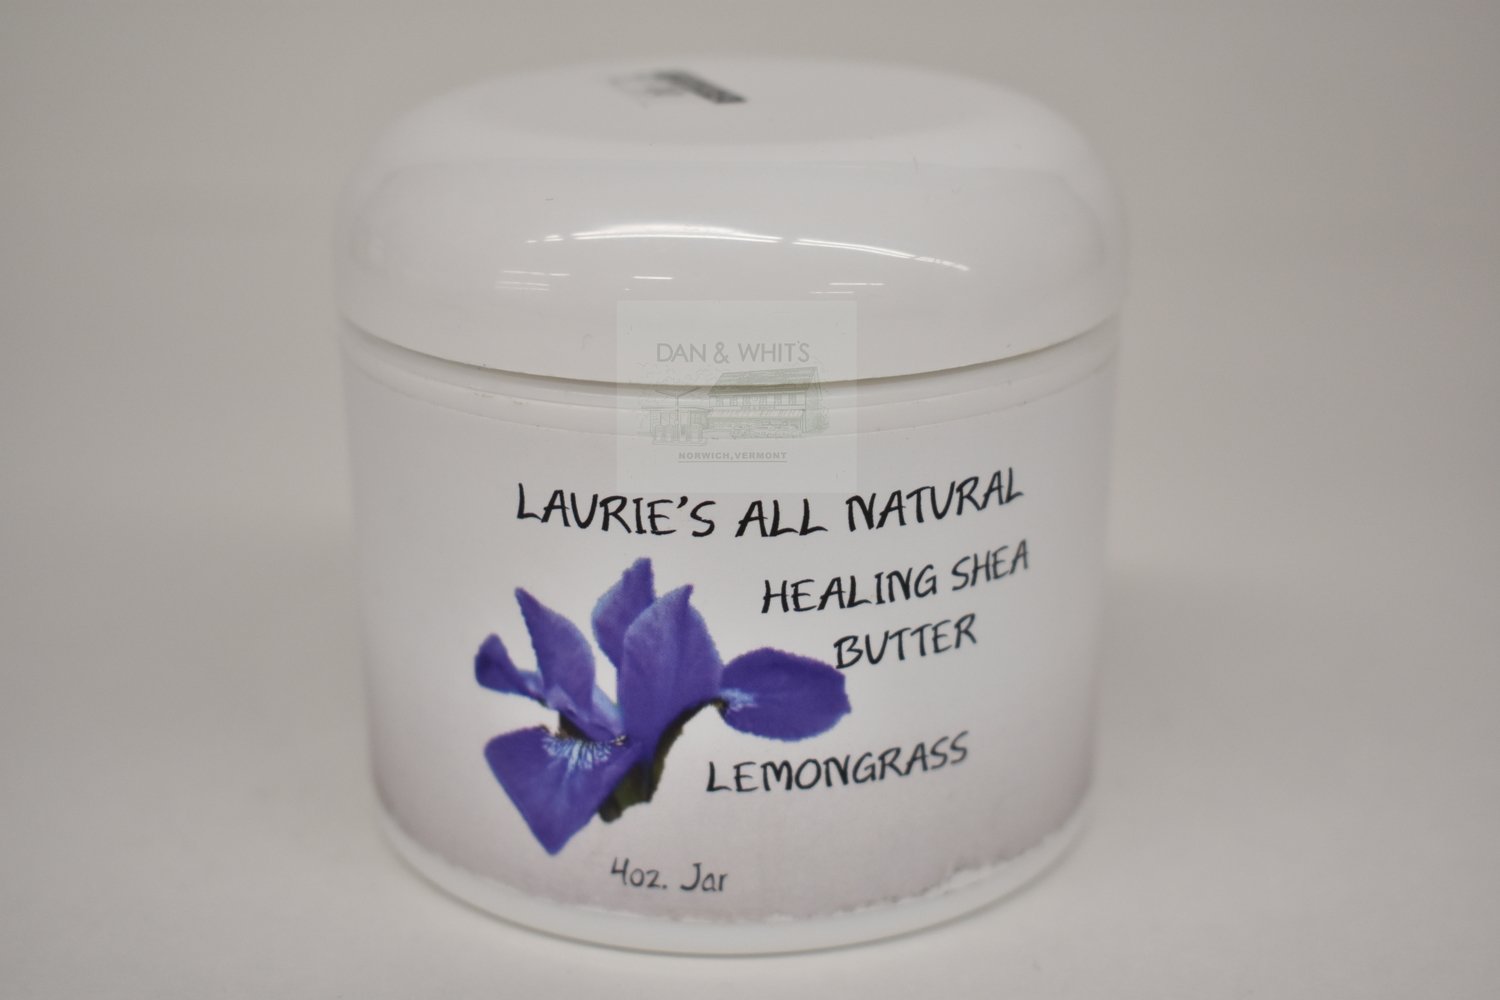 Laurie's All Natural Healing Shea Butter with Lemongrass 40z